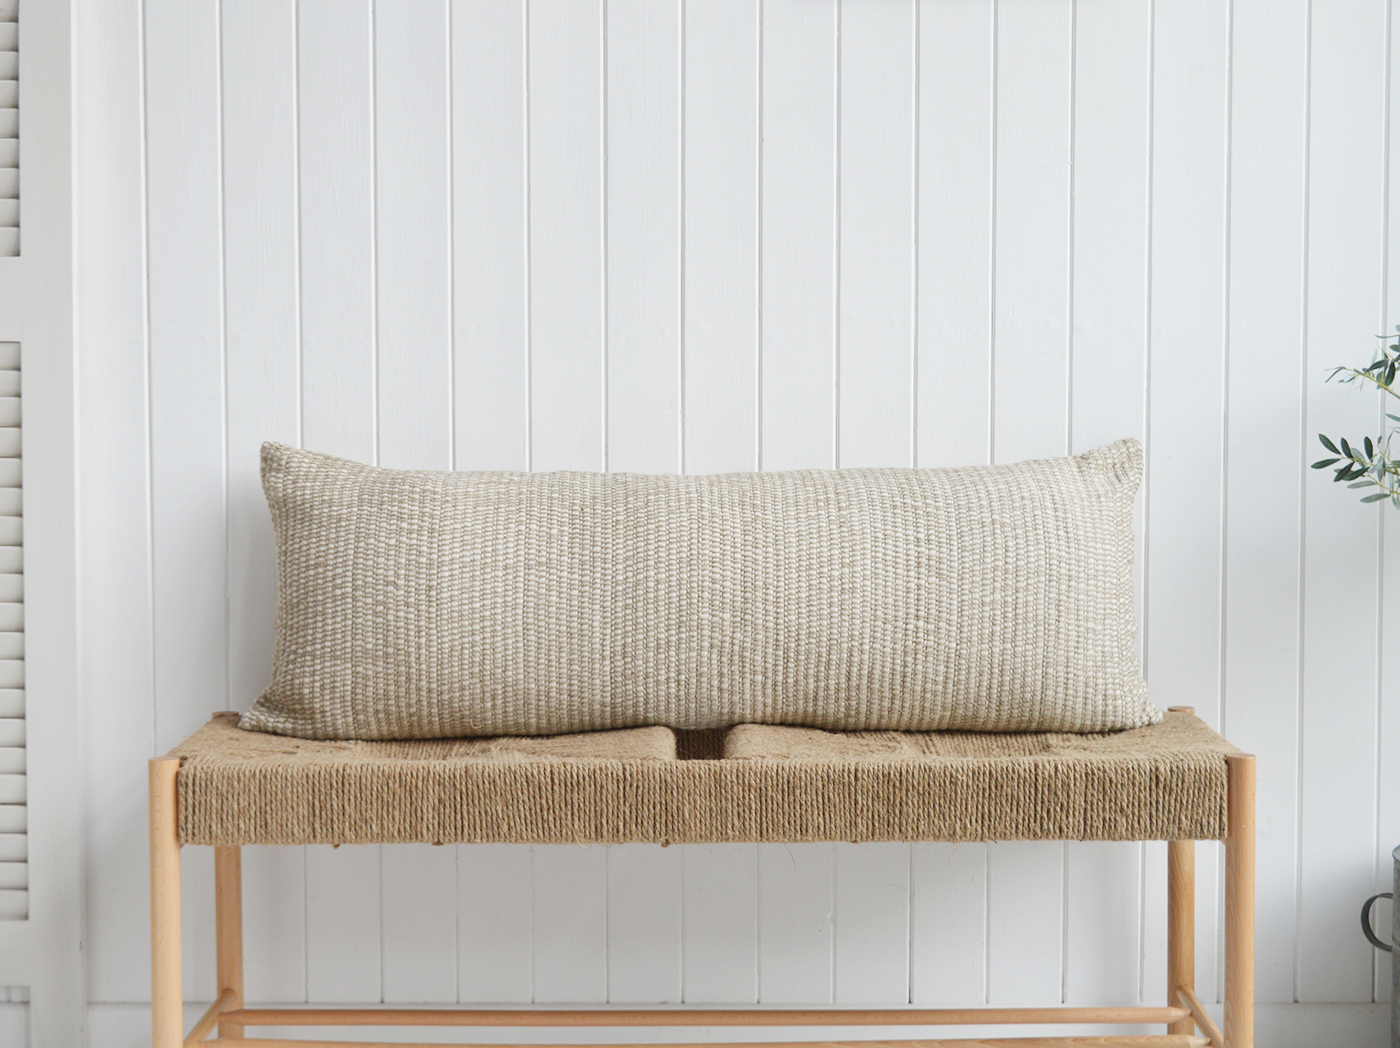 Winthrop long 1 m bench seat cushion for New England interiors